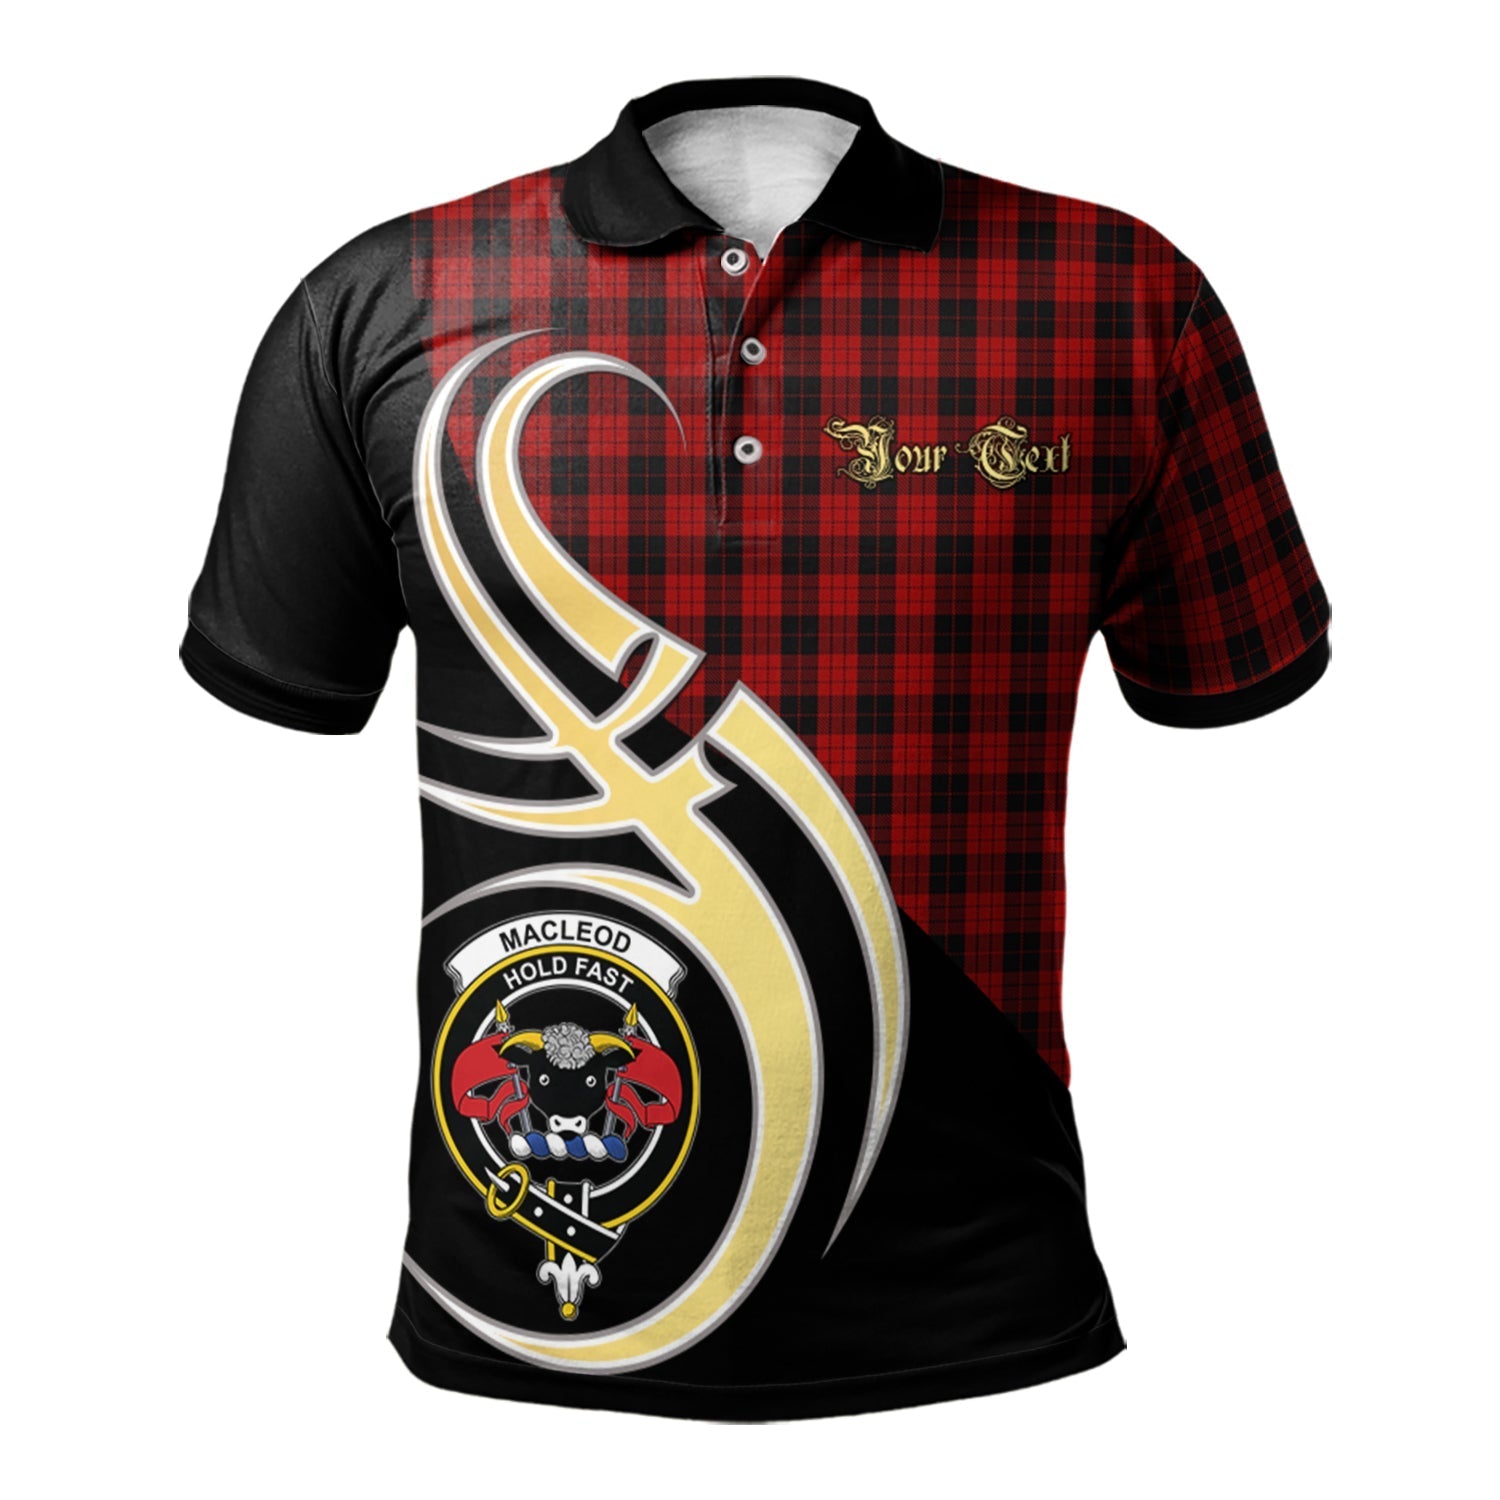 scotland-macleod-black-and-red-clan-crest-tartan-believe-in-me-polo-shirt